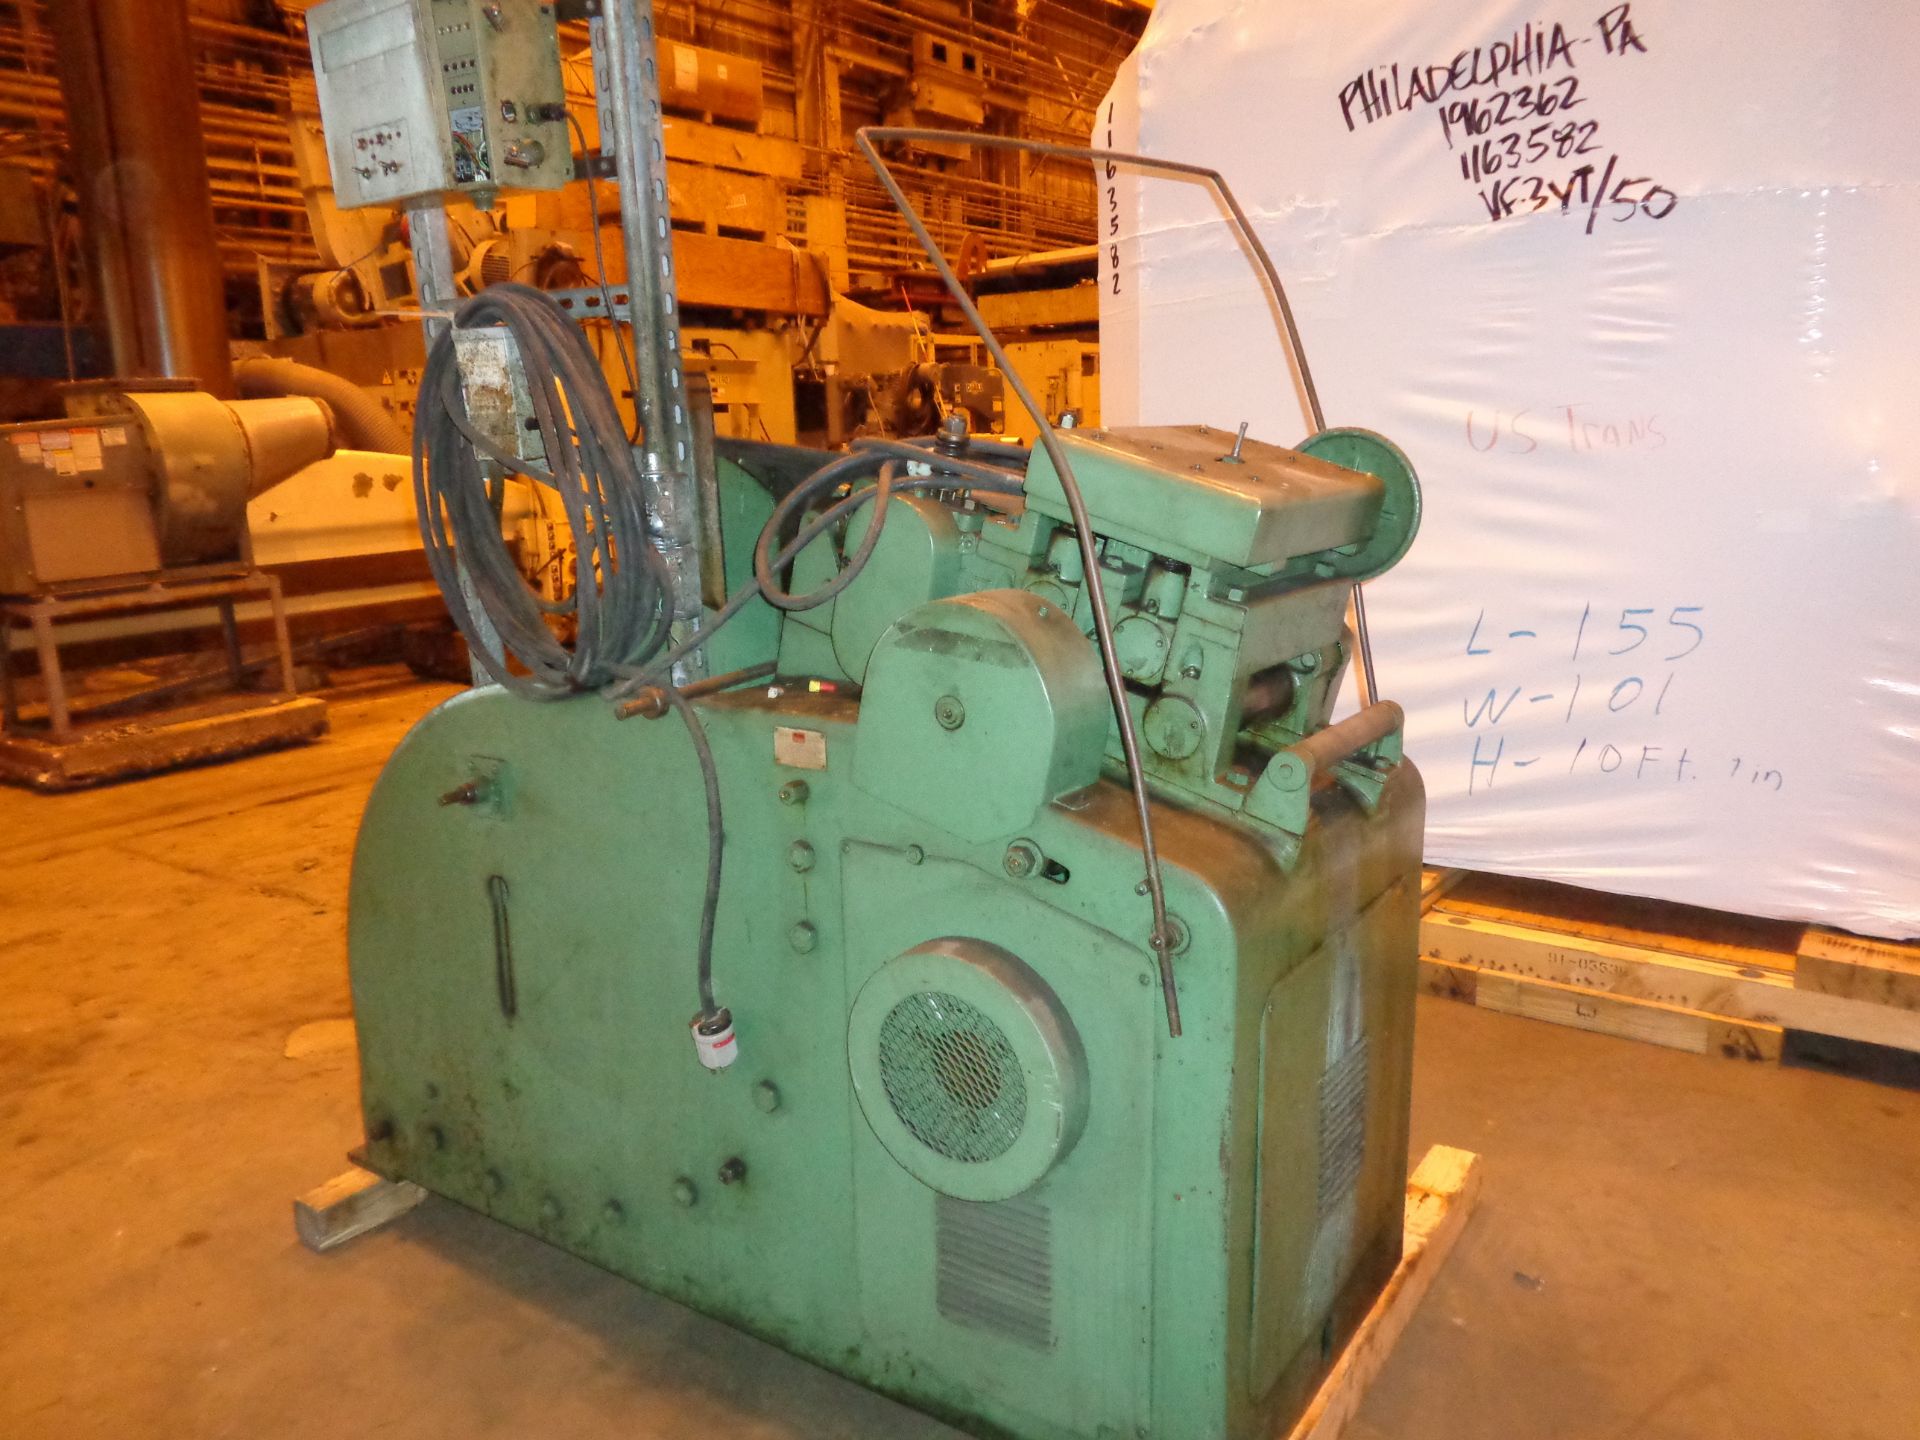 Littell Continuous Steel Coil Straightening Machine - Image 5 of 7